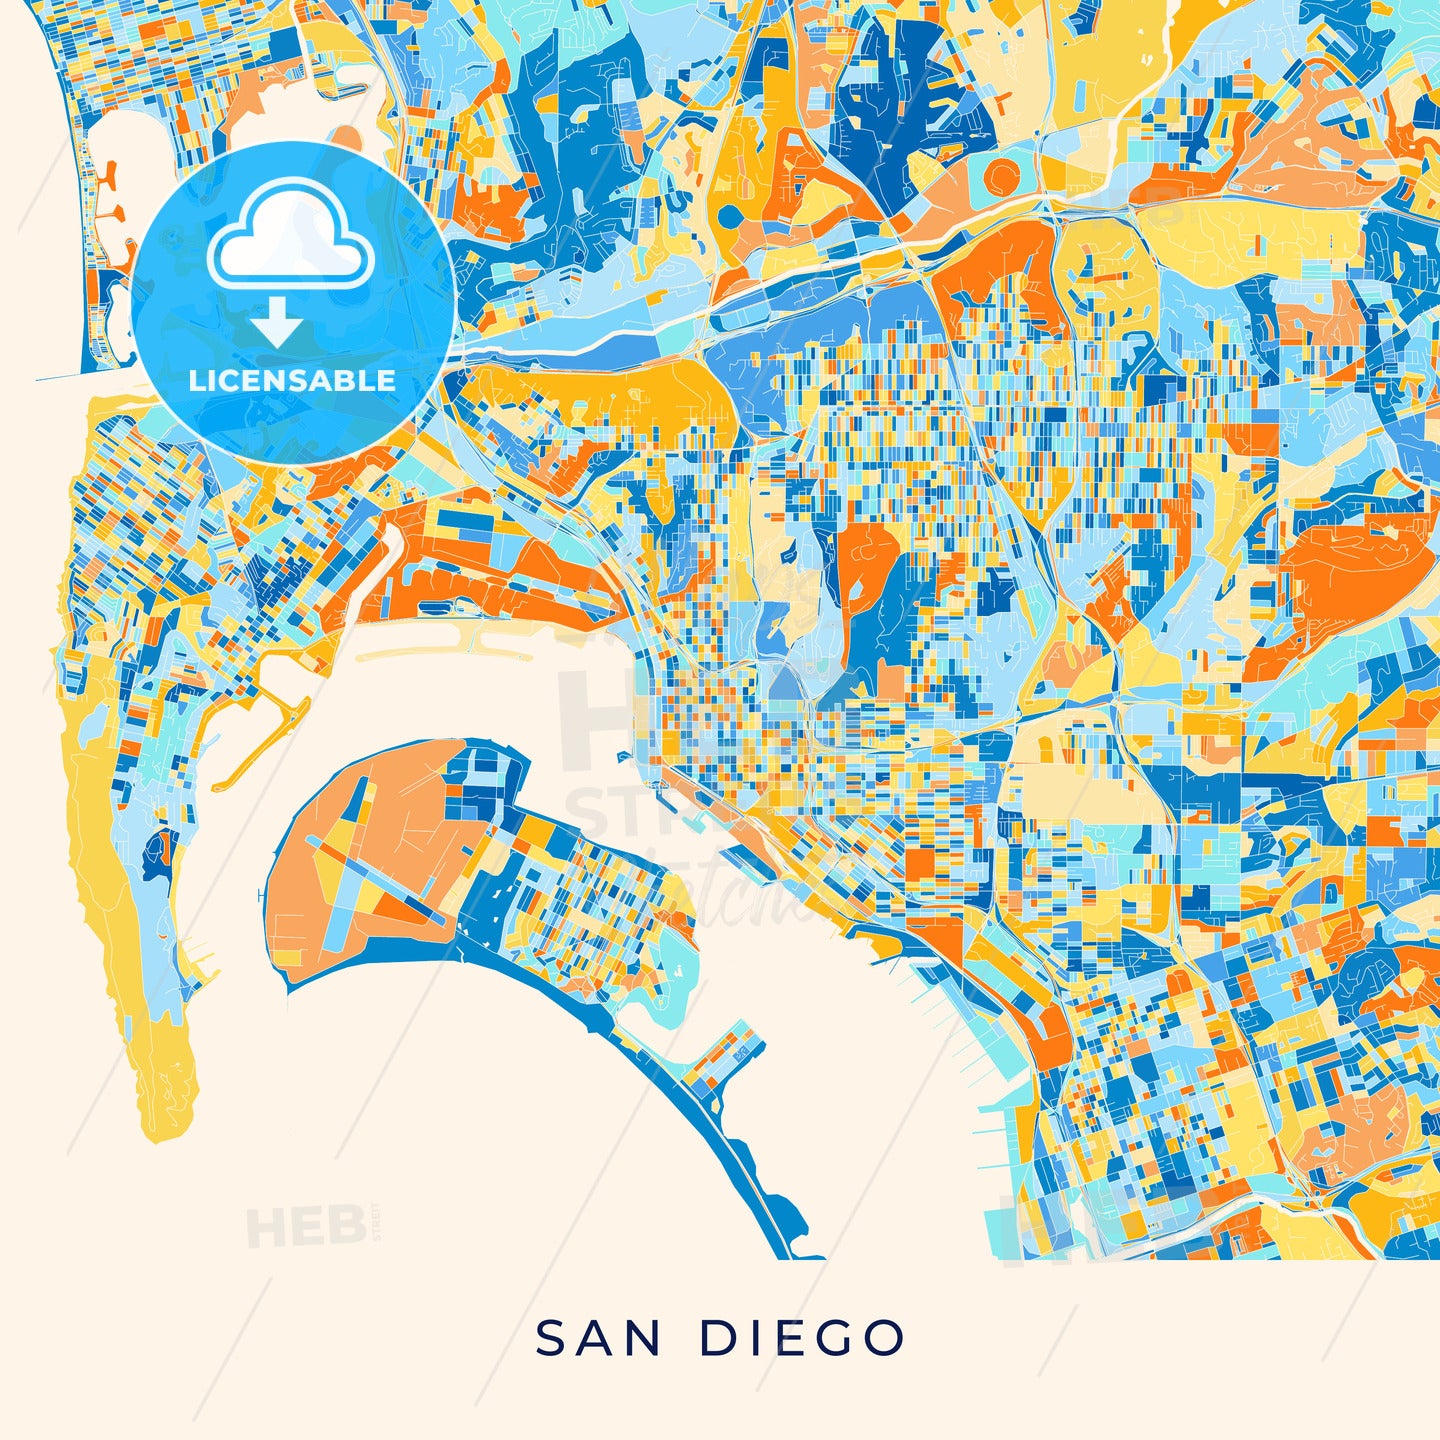 San Diego colorful map poster template